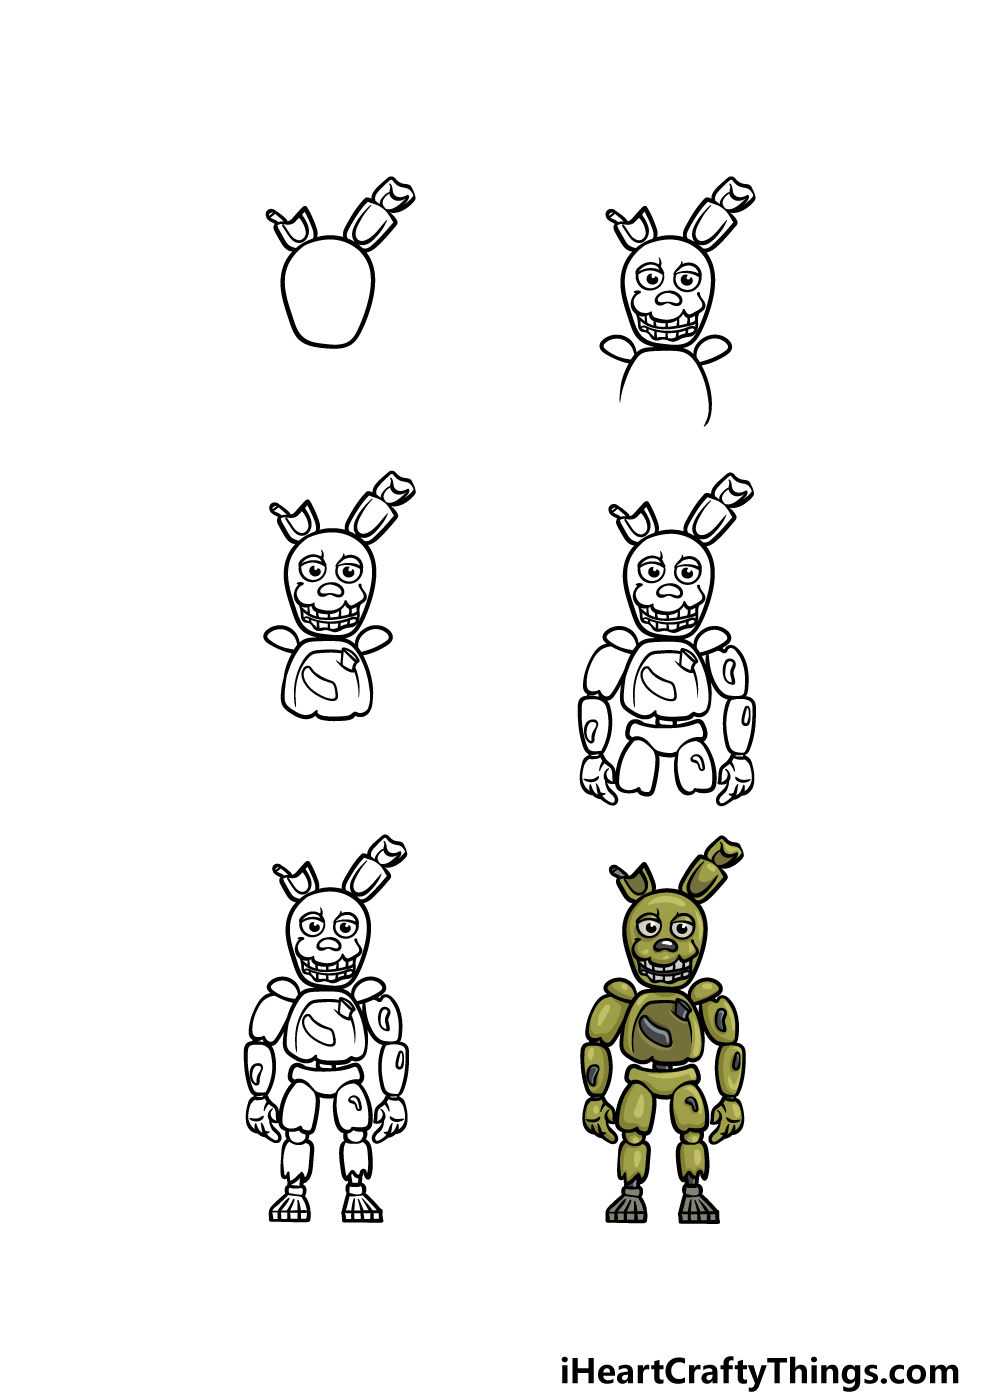 How to Draw Springtrap in 6 steps